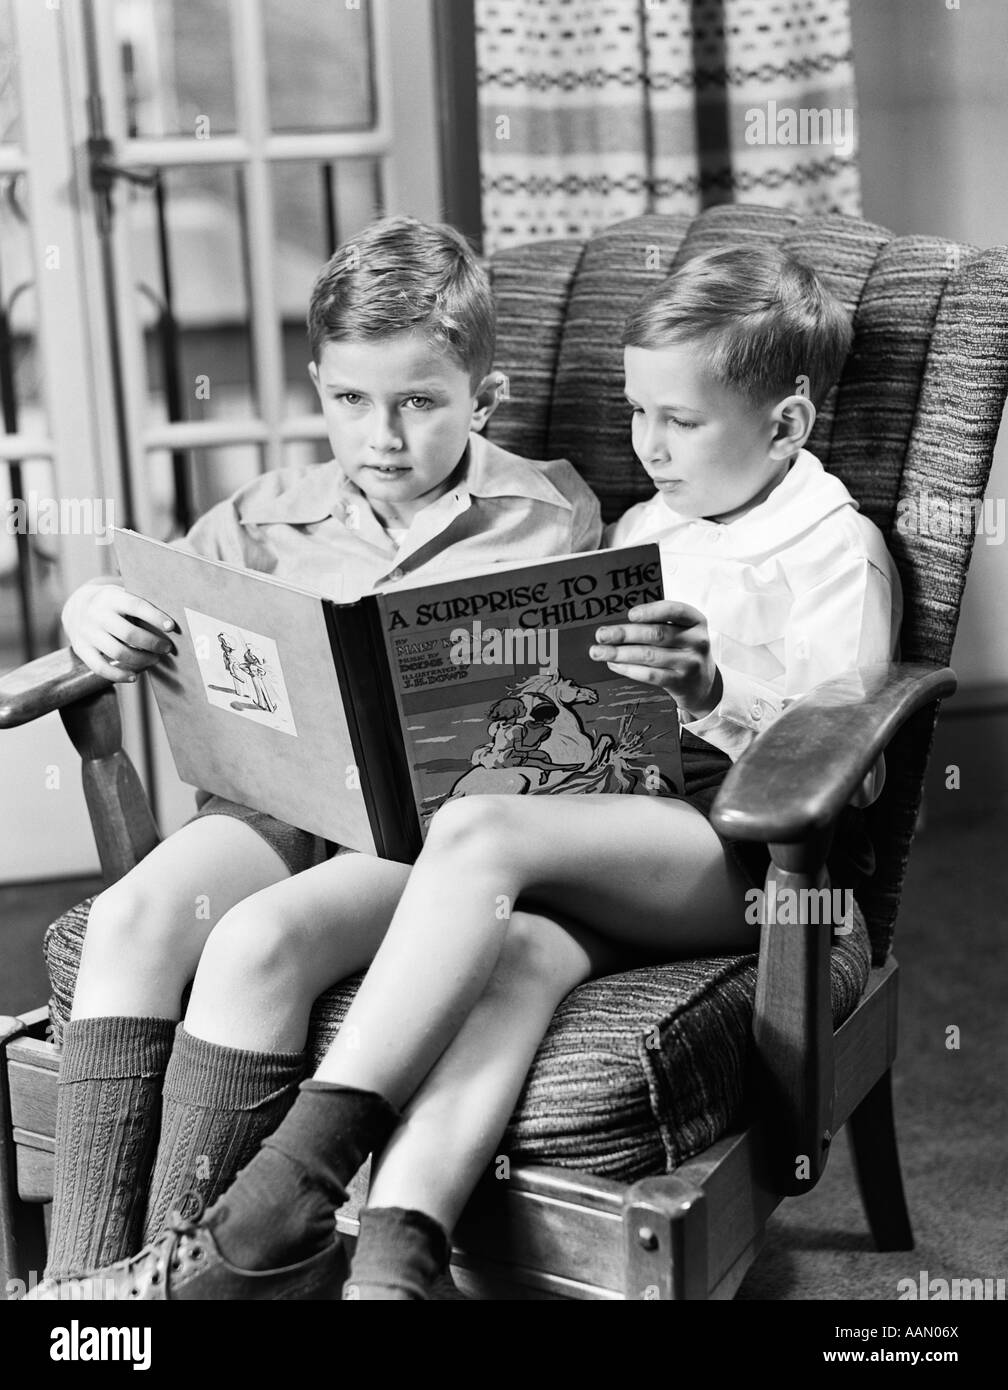 1940s TWO BOYS SITTING IN ONE CHAIR SHARING LARGE BOOK ARMCHAIR Stock Photo